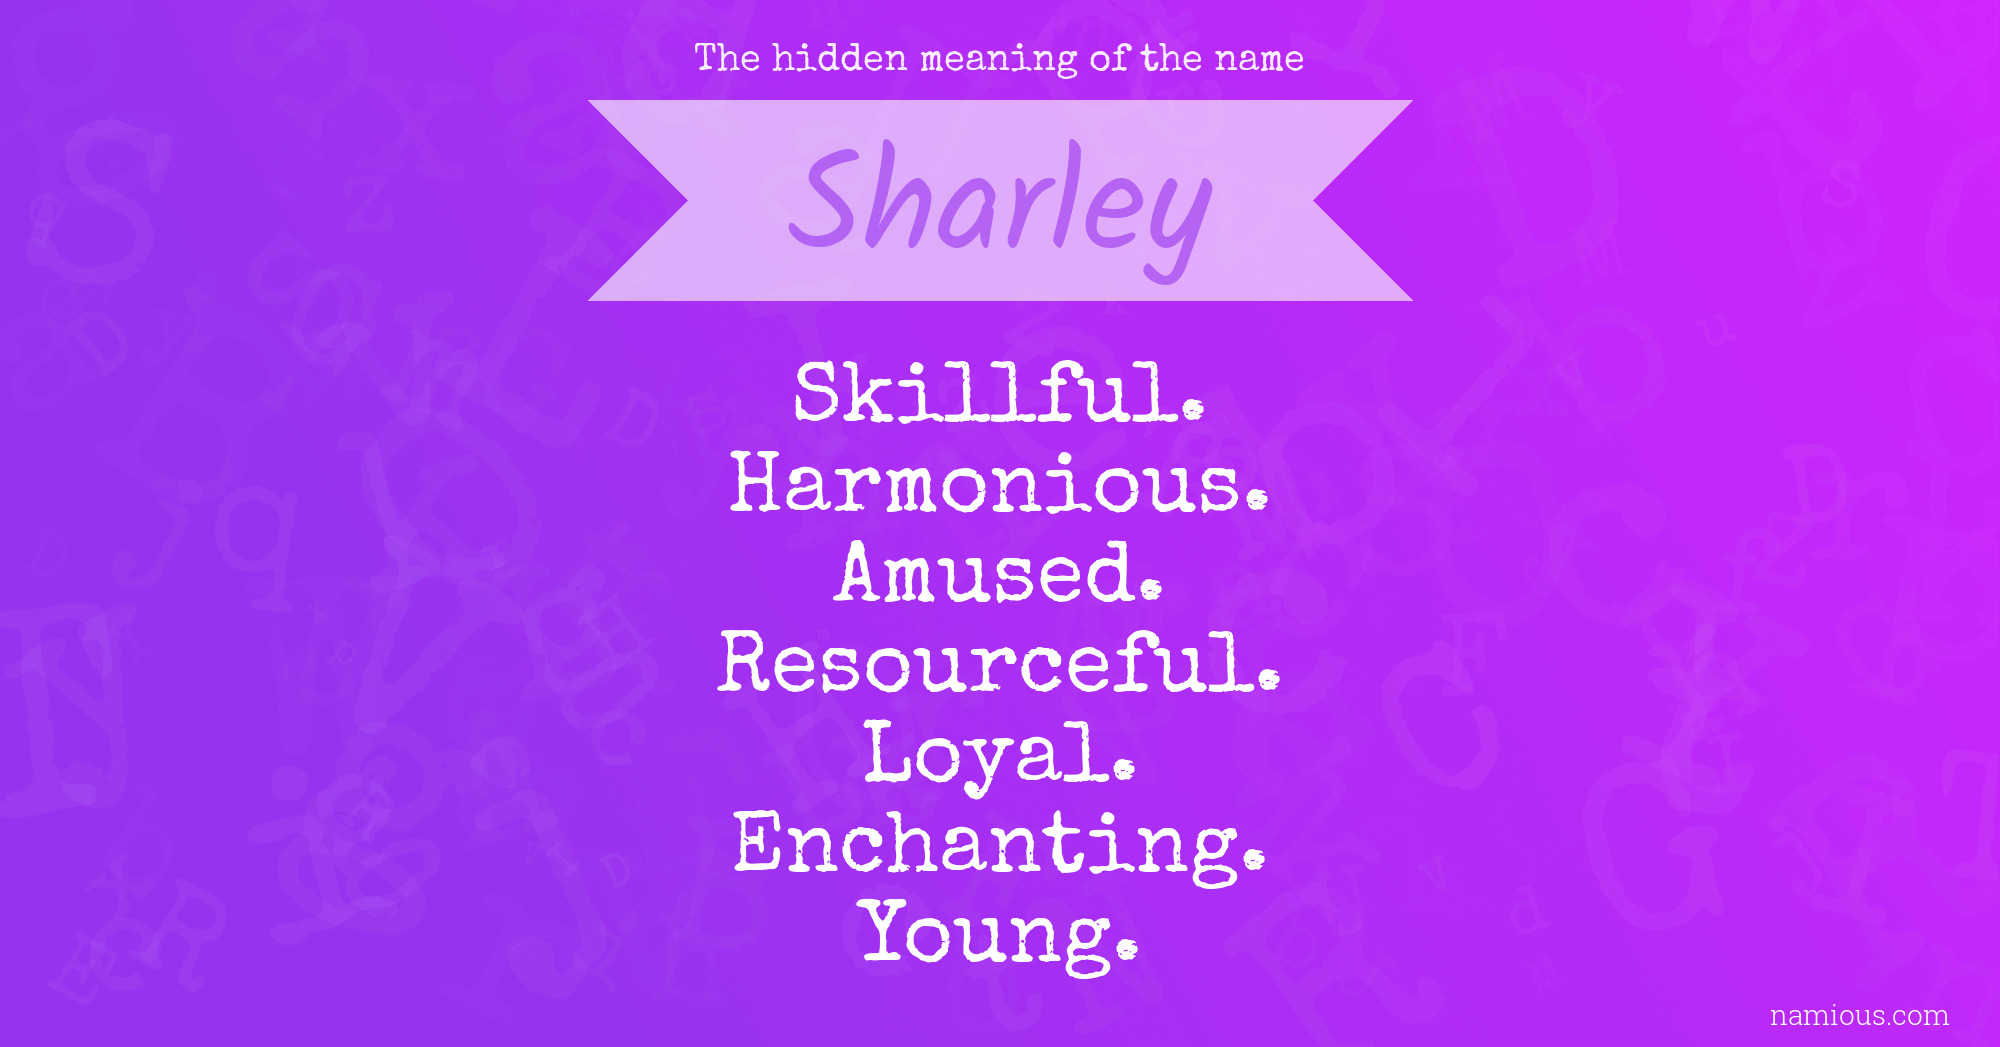 The hidden meaning of the name Sharley